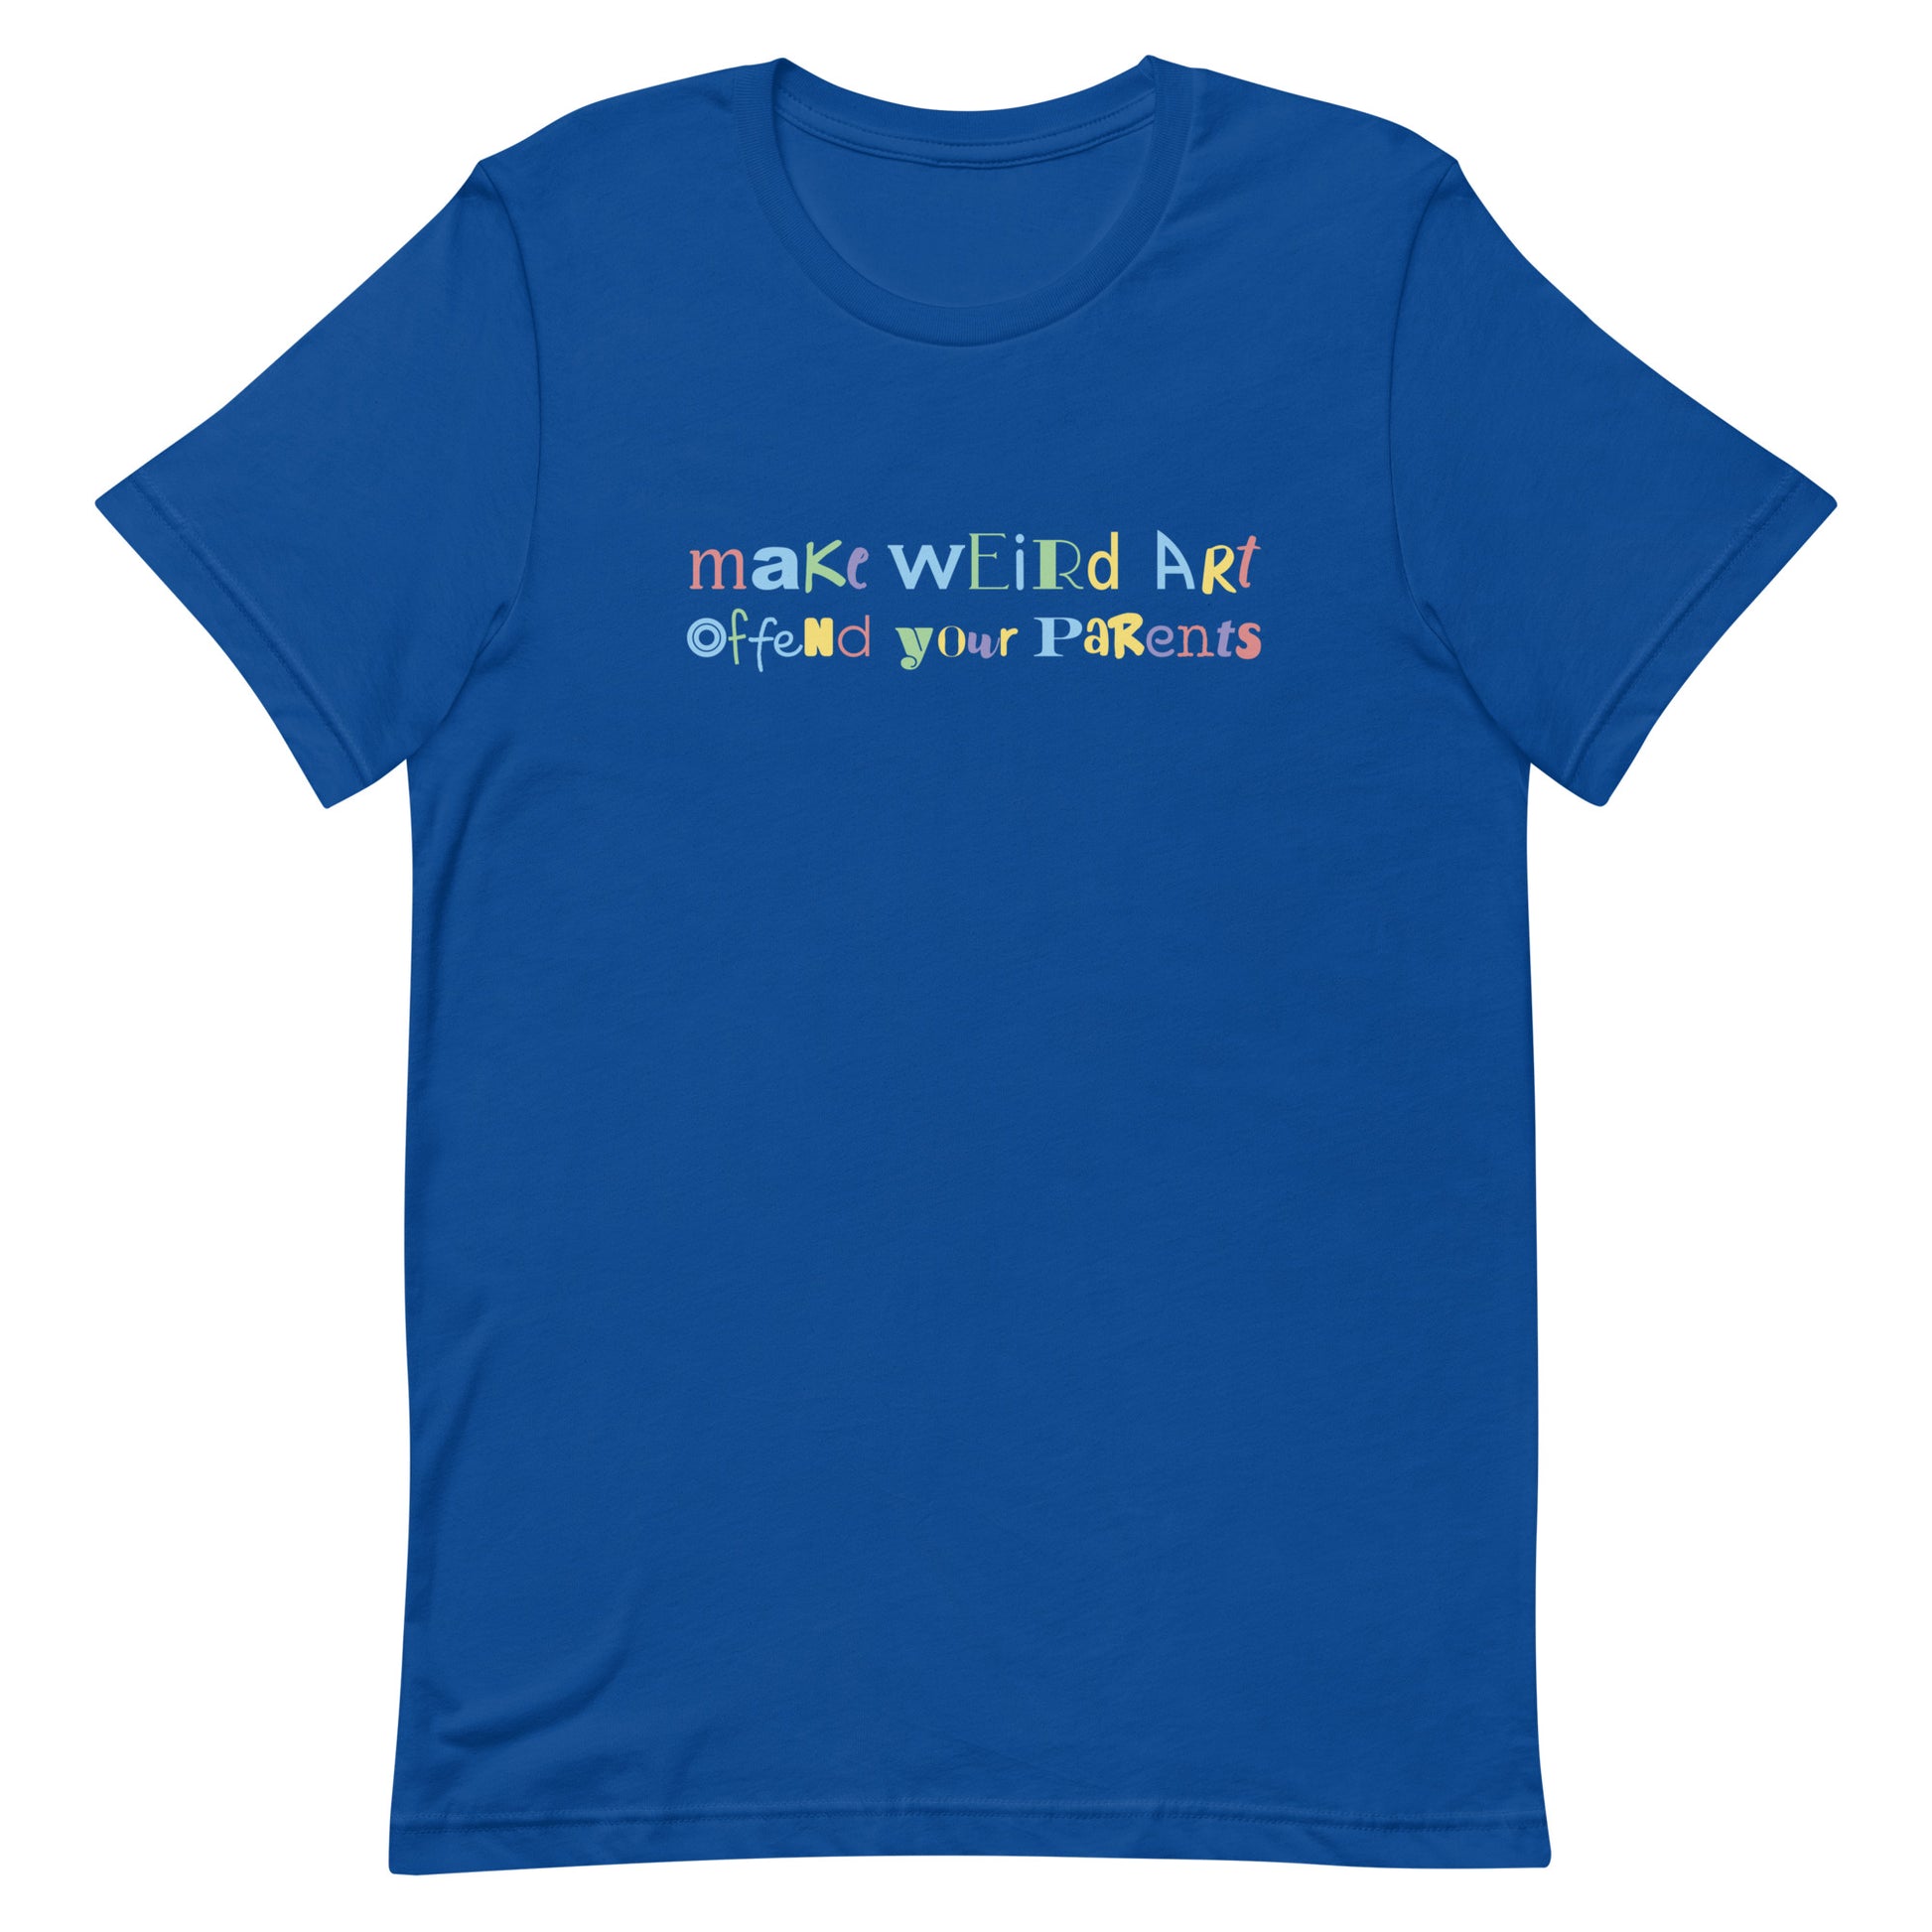 A blue crewneck t-shirt with text that reads "make weird art, offend your parents". The text is a scrambled collection of different colors and fonts.